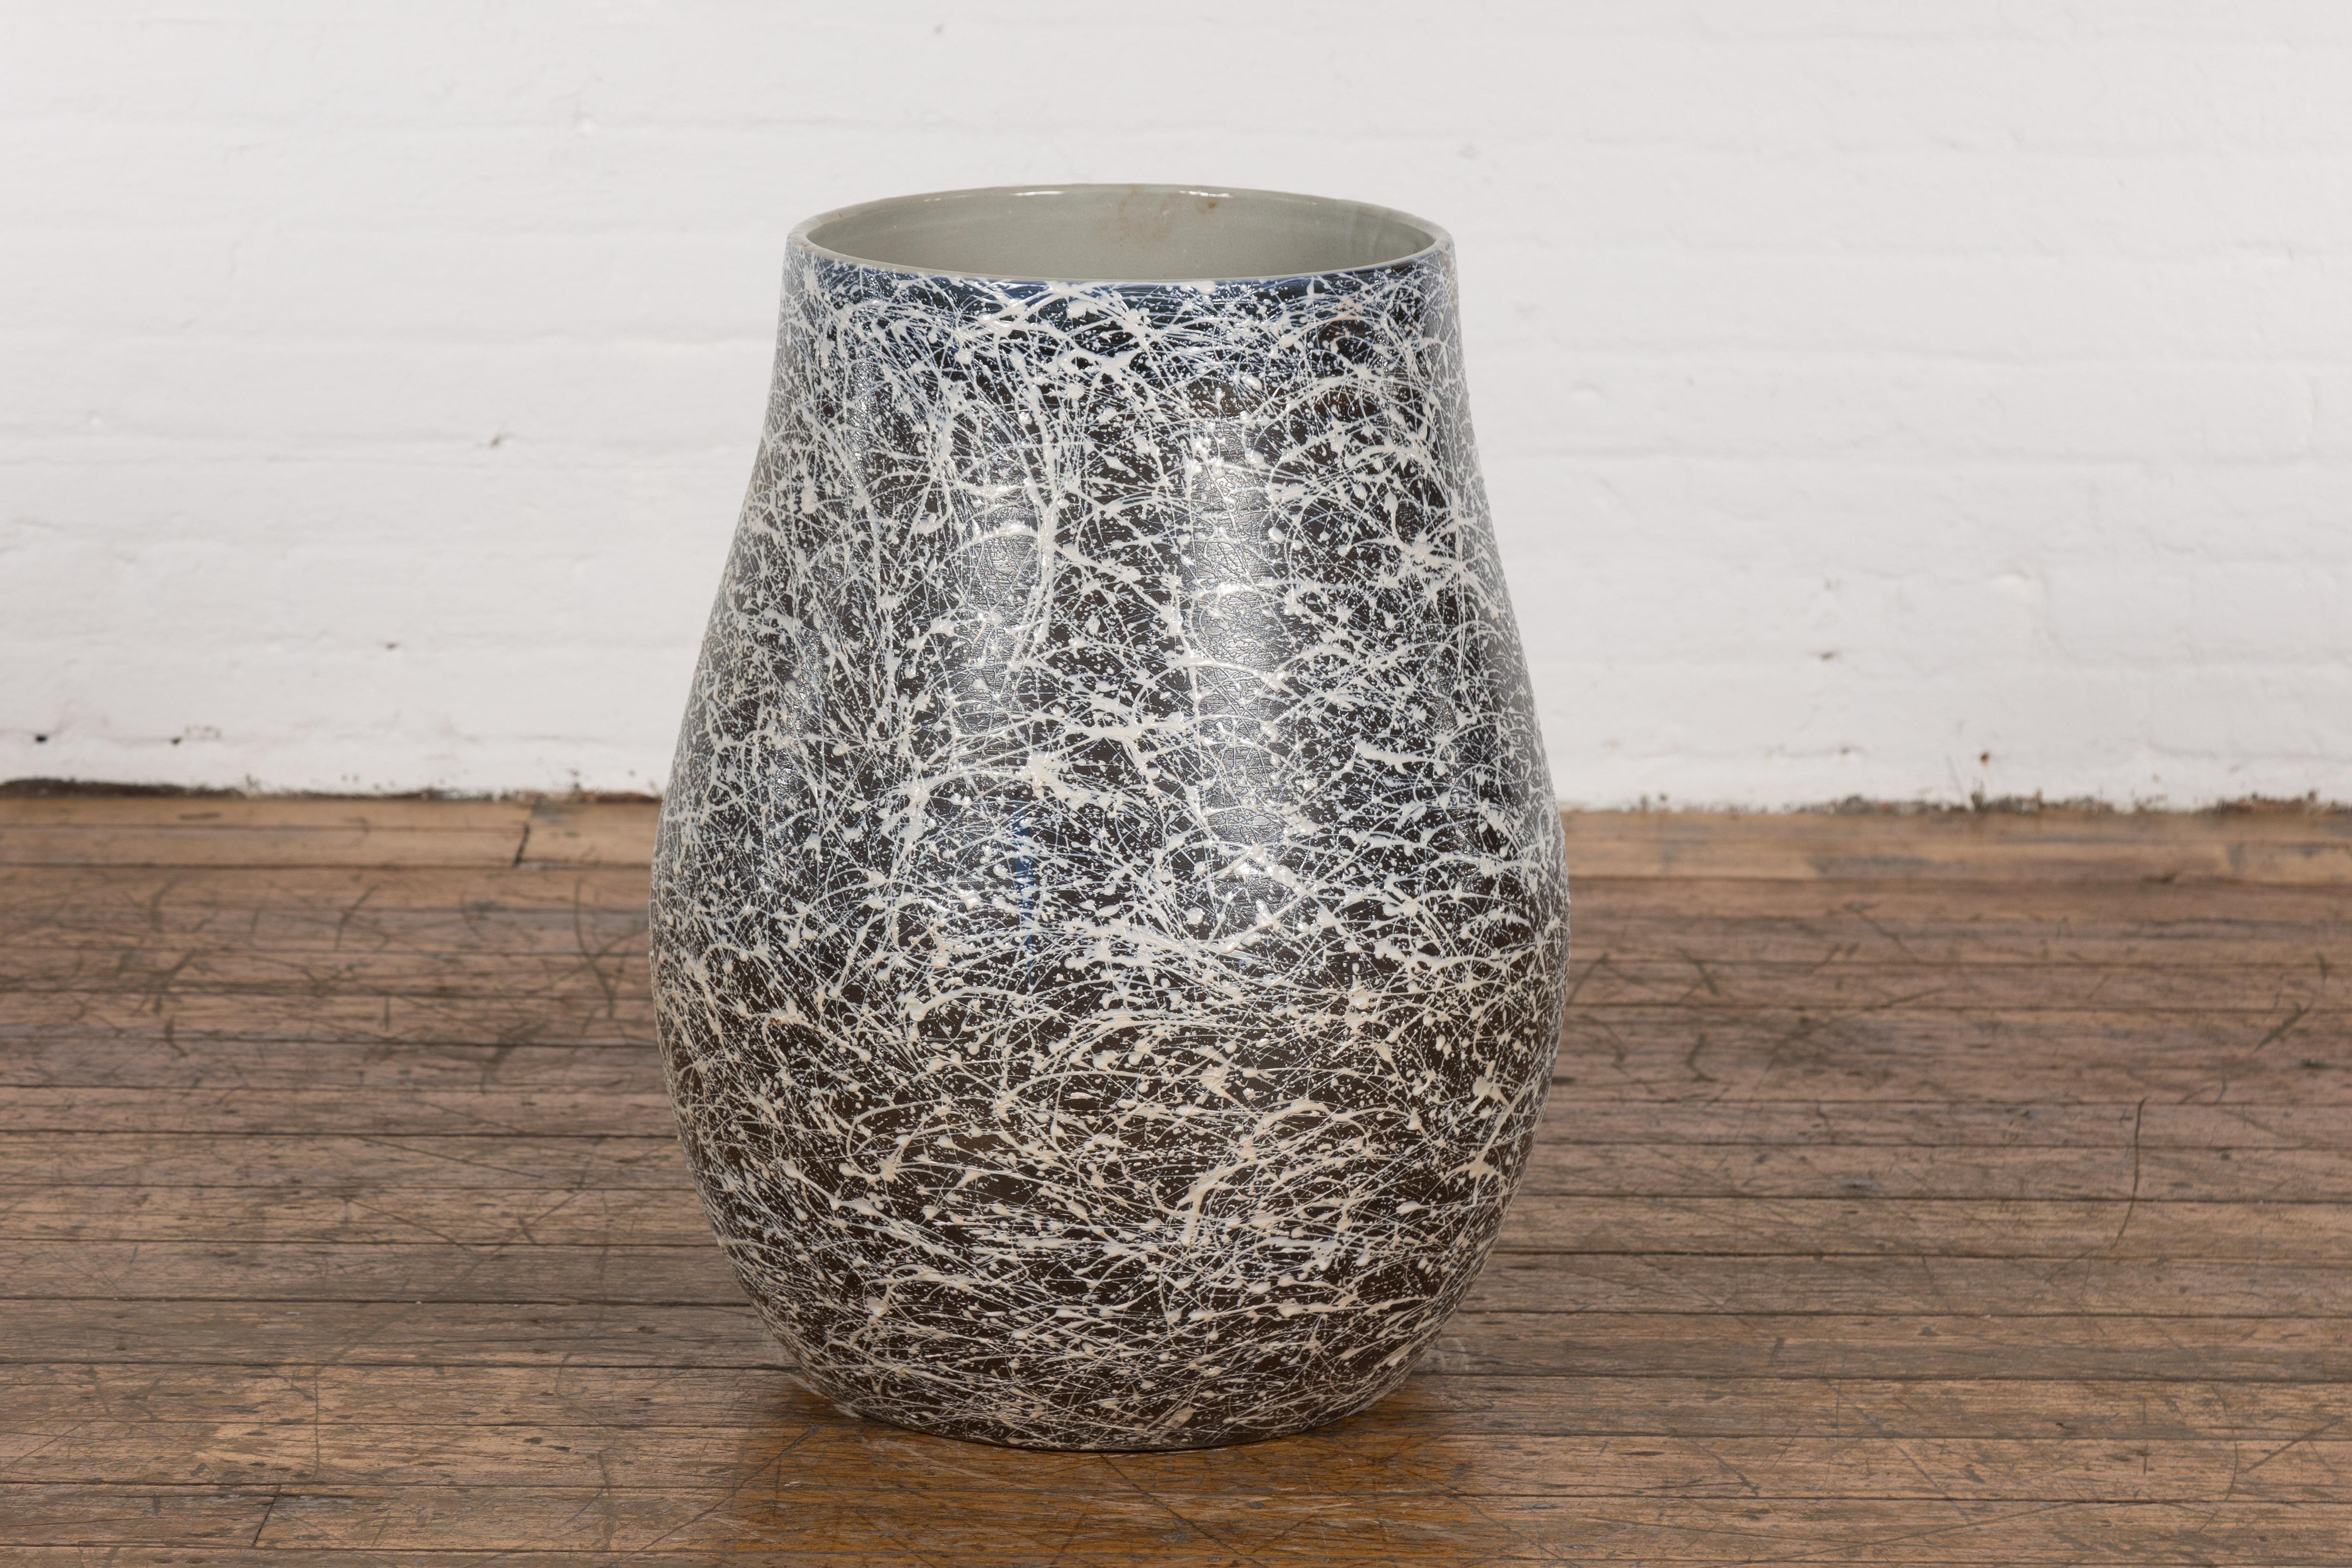 An artisan Prem Collection ceramic planter with nice rounded shape, black ground, white and grey blue splatter and grey glazed interior. Charming our eyes with its graceful lines, nice proportions and stylish décor, this planter is hand-crafted from